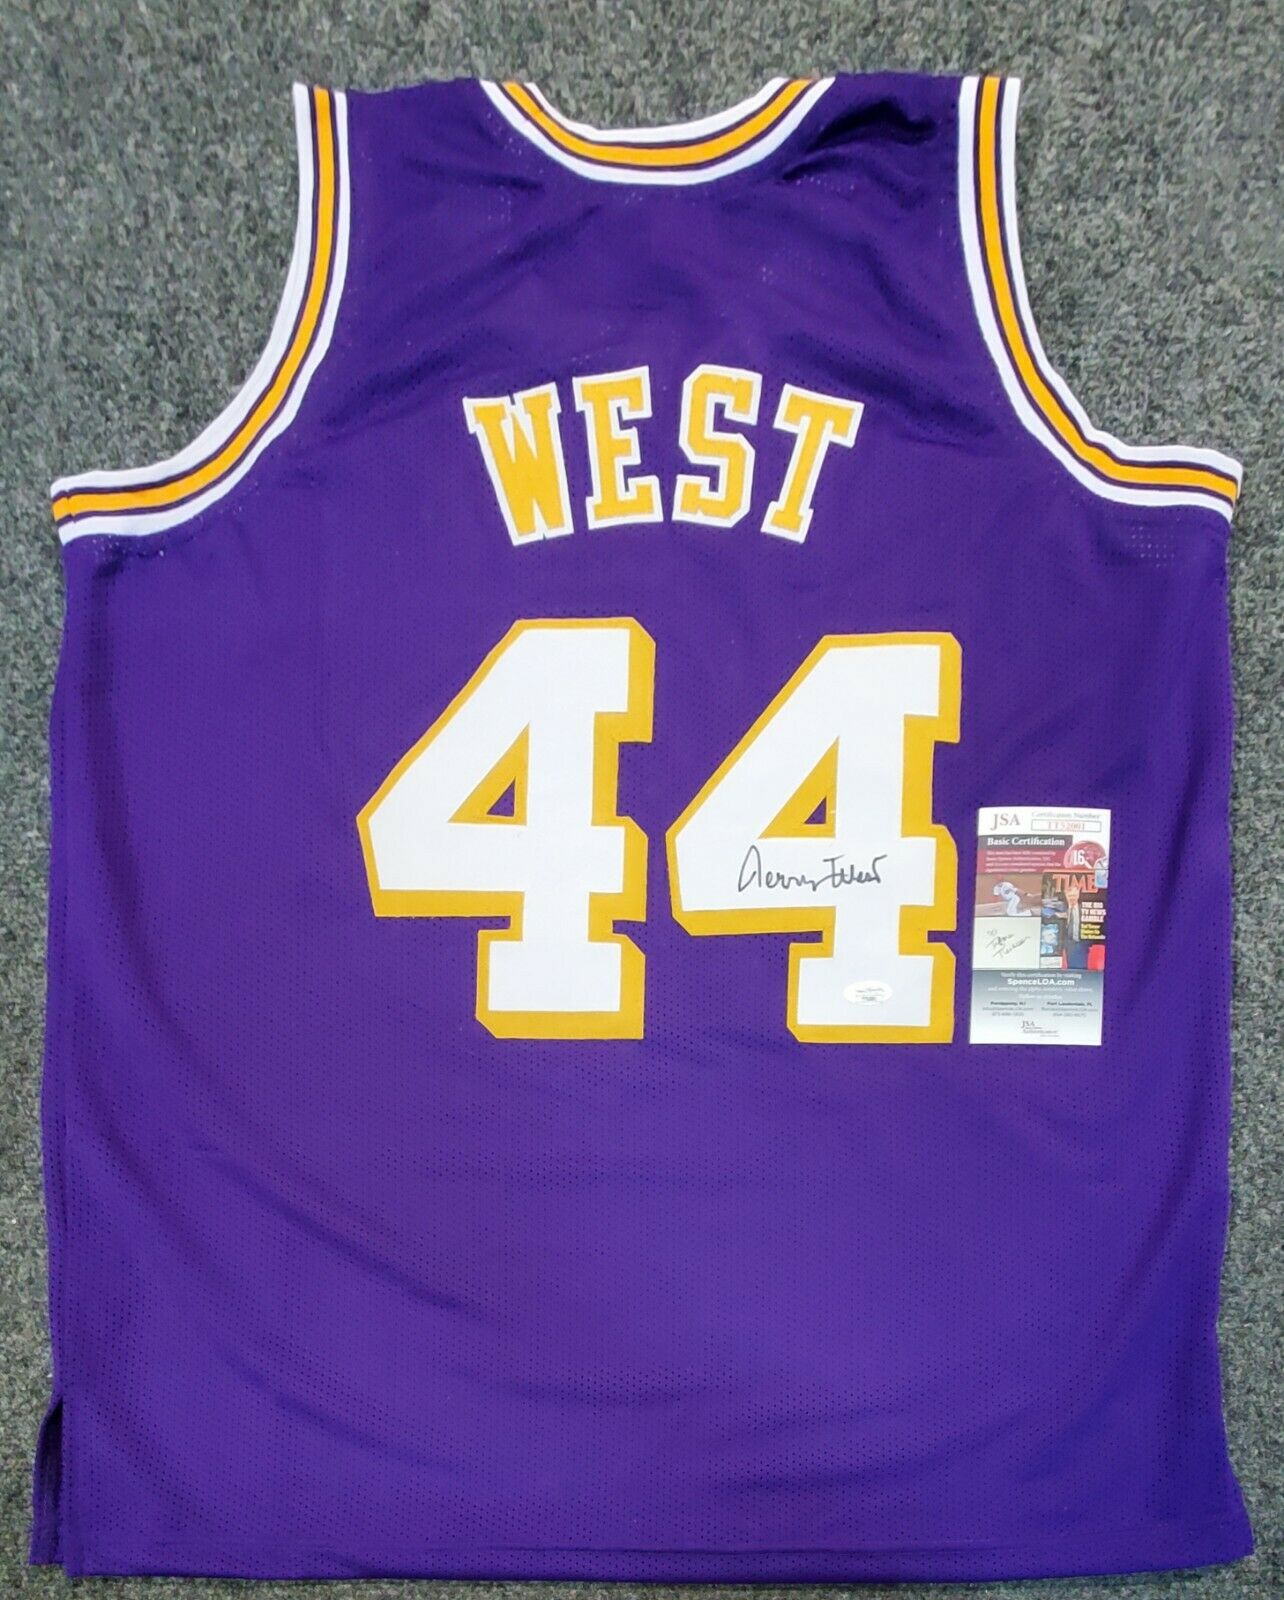 MVP Authentics Los Angeles Lakers Jerry West Autographed Signed Jersey Jsa Coa 224.10 sports jersey framing , jersey framing